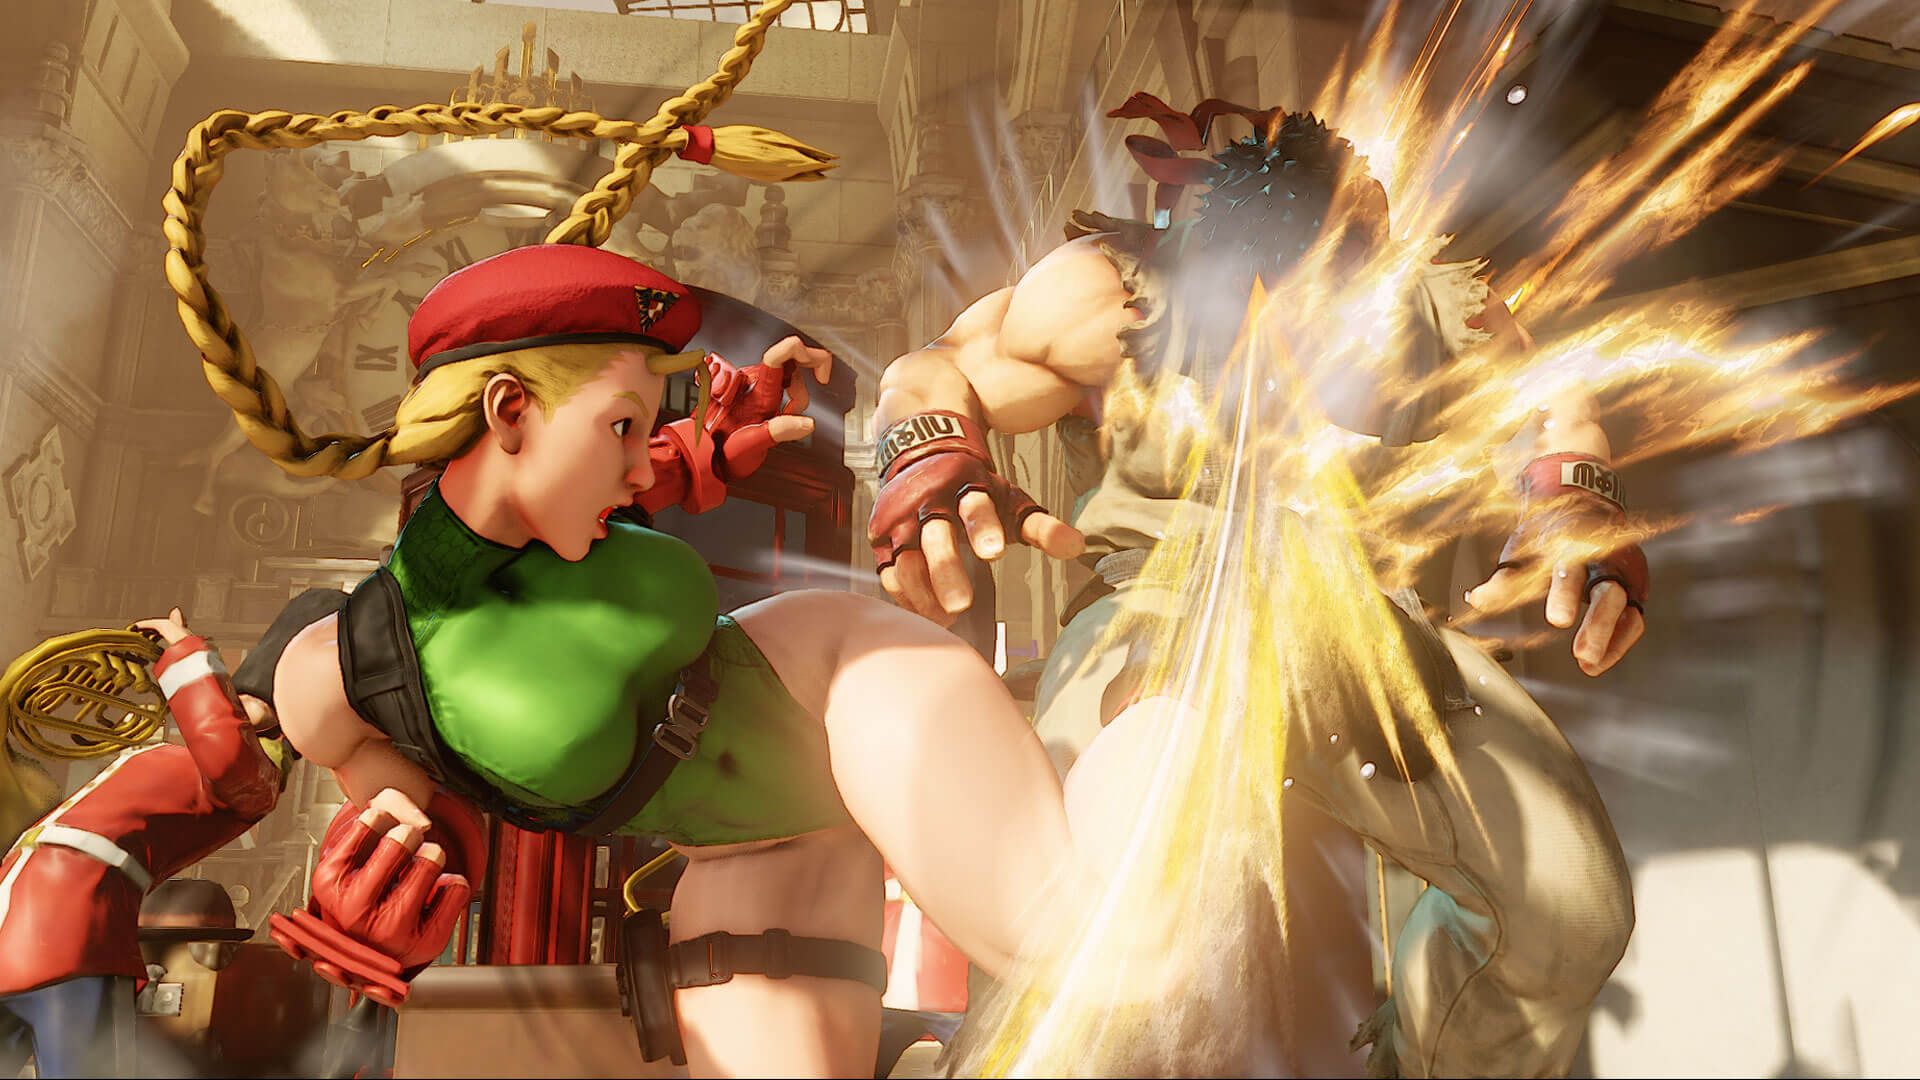 Cammy Ultra Street Fighter 4 moves list, strategy guide, combos